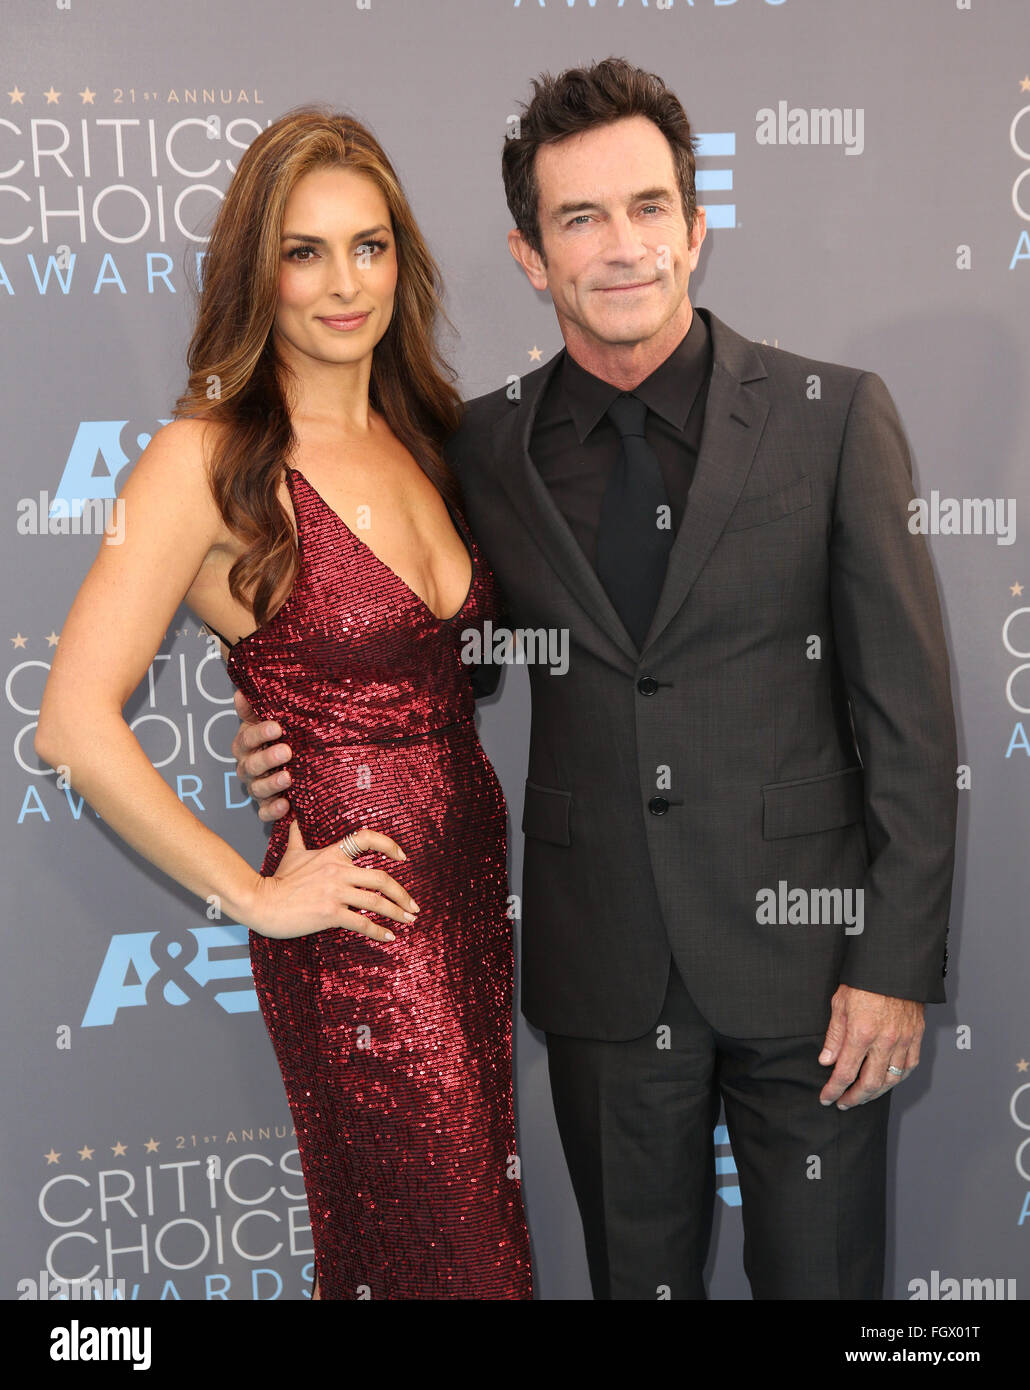 Celebrities attend The 21st Annual Critics’ Choice Awards at Barker Hangar.  Featuring: Lisa Ann Russell, Jeff Probst Where: Los Angeles, California, United States When: 17 Jan 2016 Stock Photo